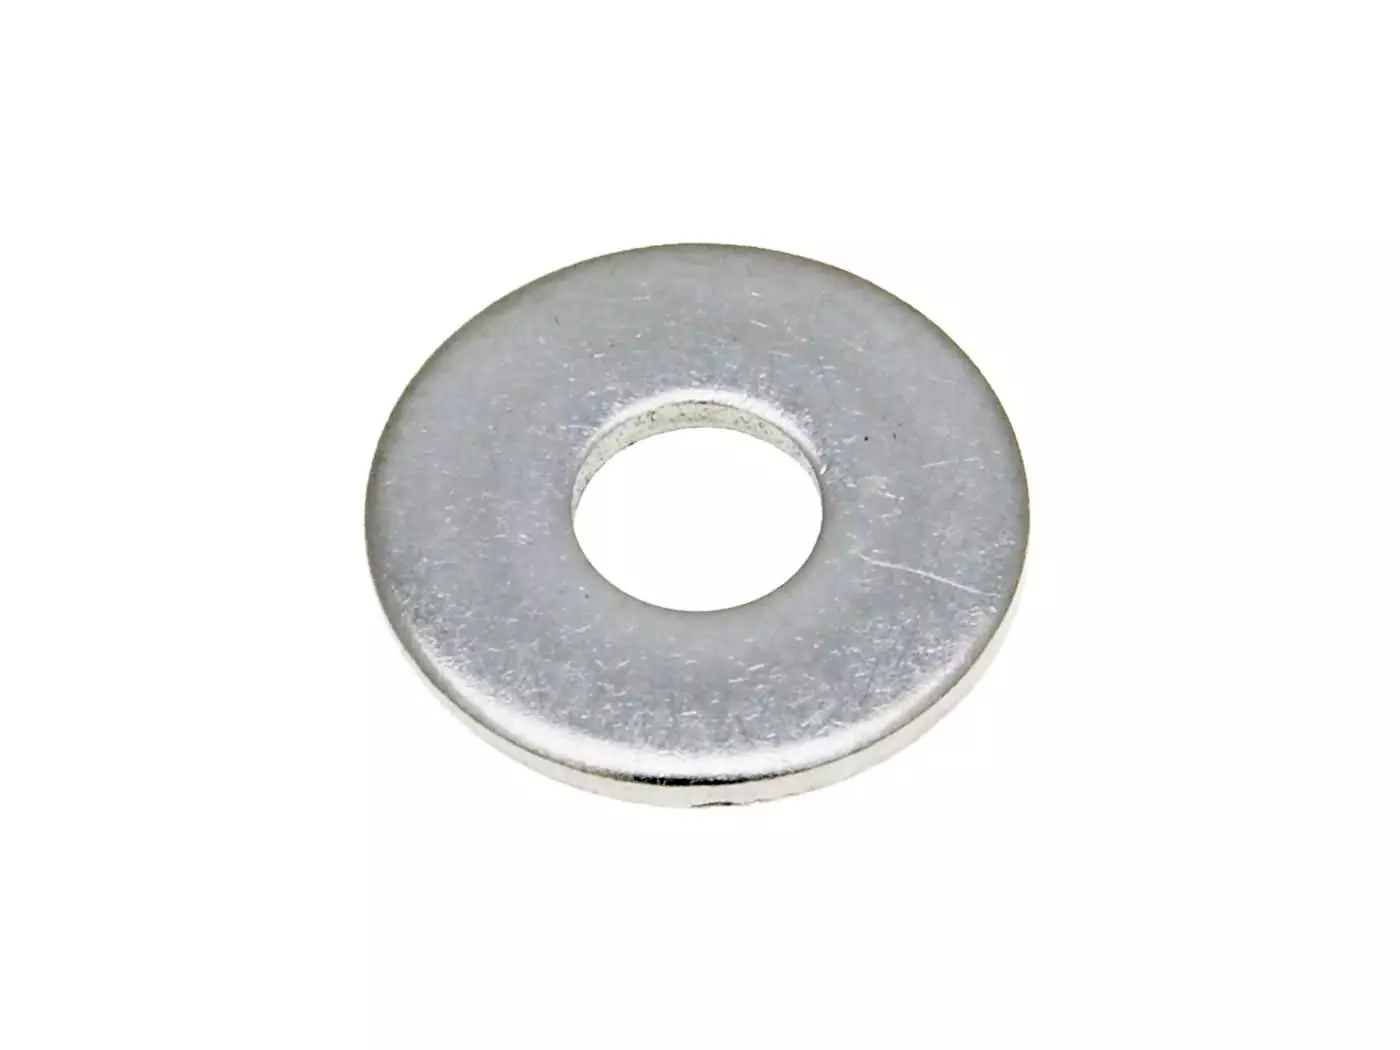 Large Diameter Washers DIN9021 6.4x18x1.6 M6 Stainless Steel A2 (100 Pcs)